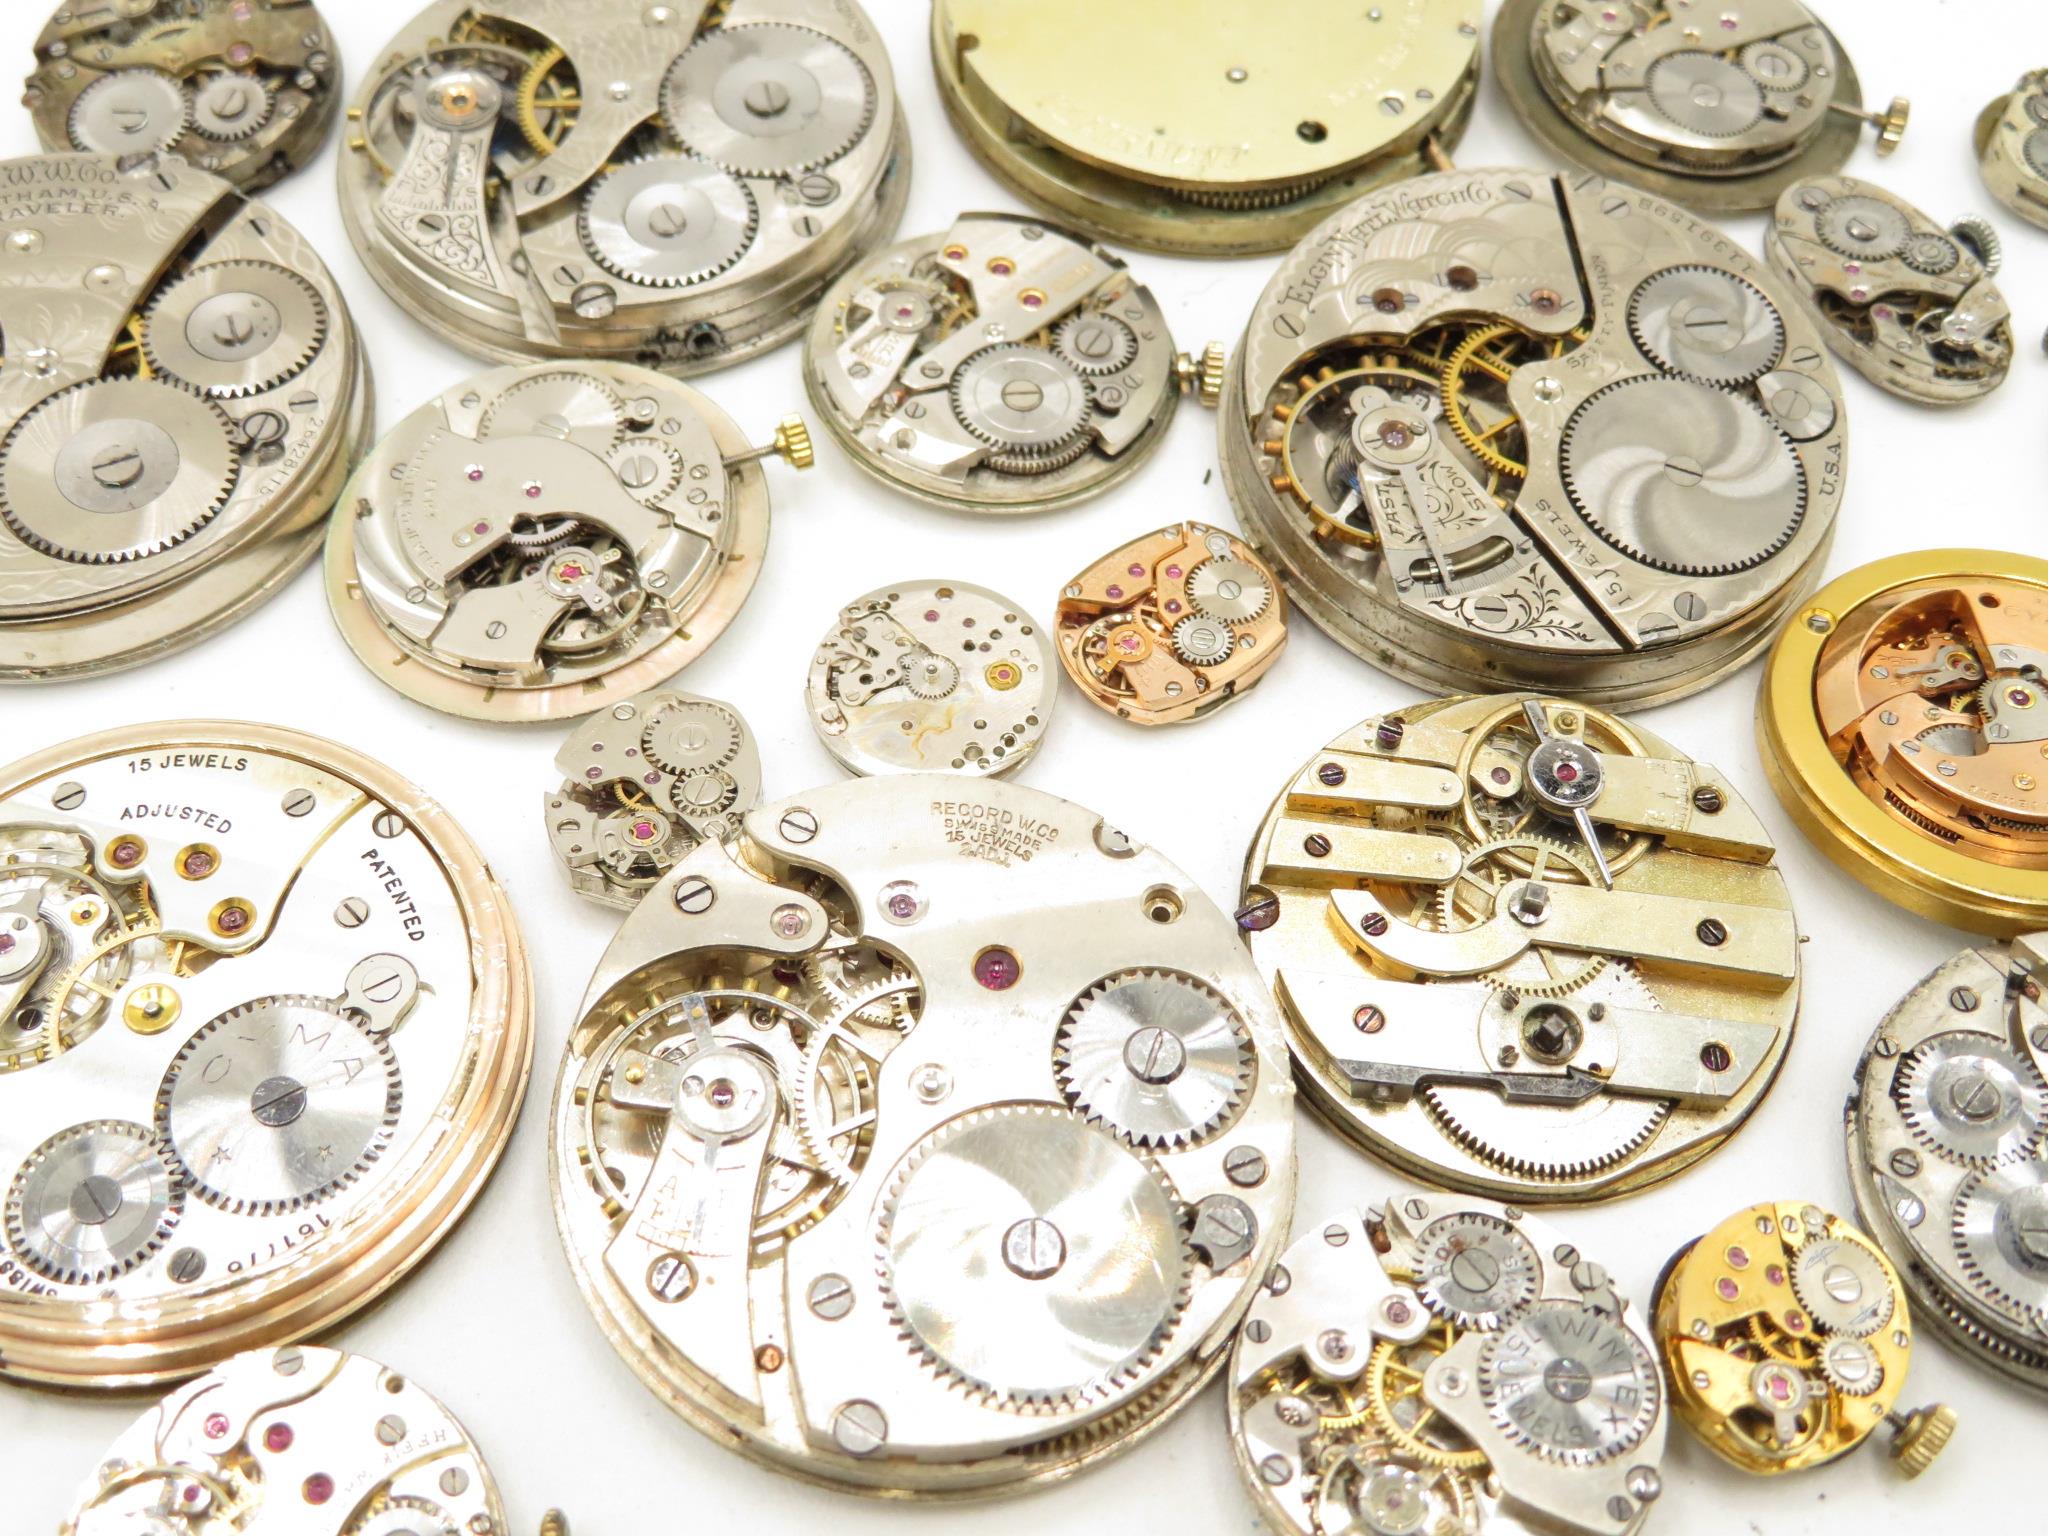 Bag of pocket watch and wristwatch movements 632g - Image 11 of 11